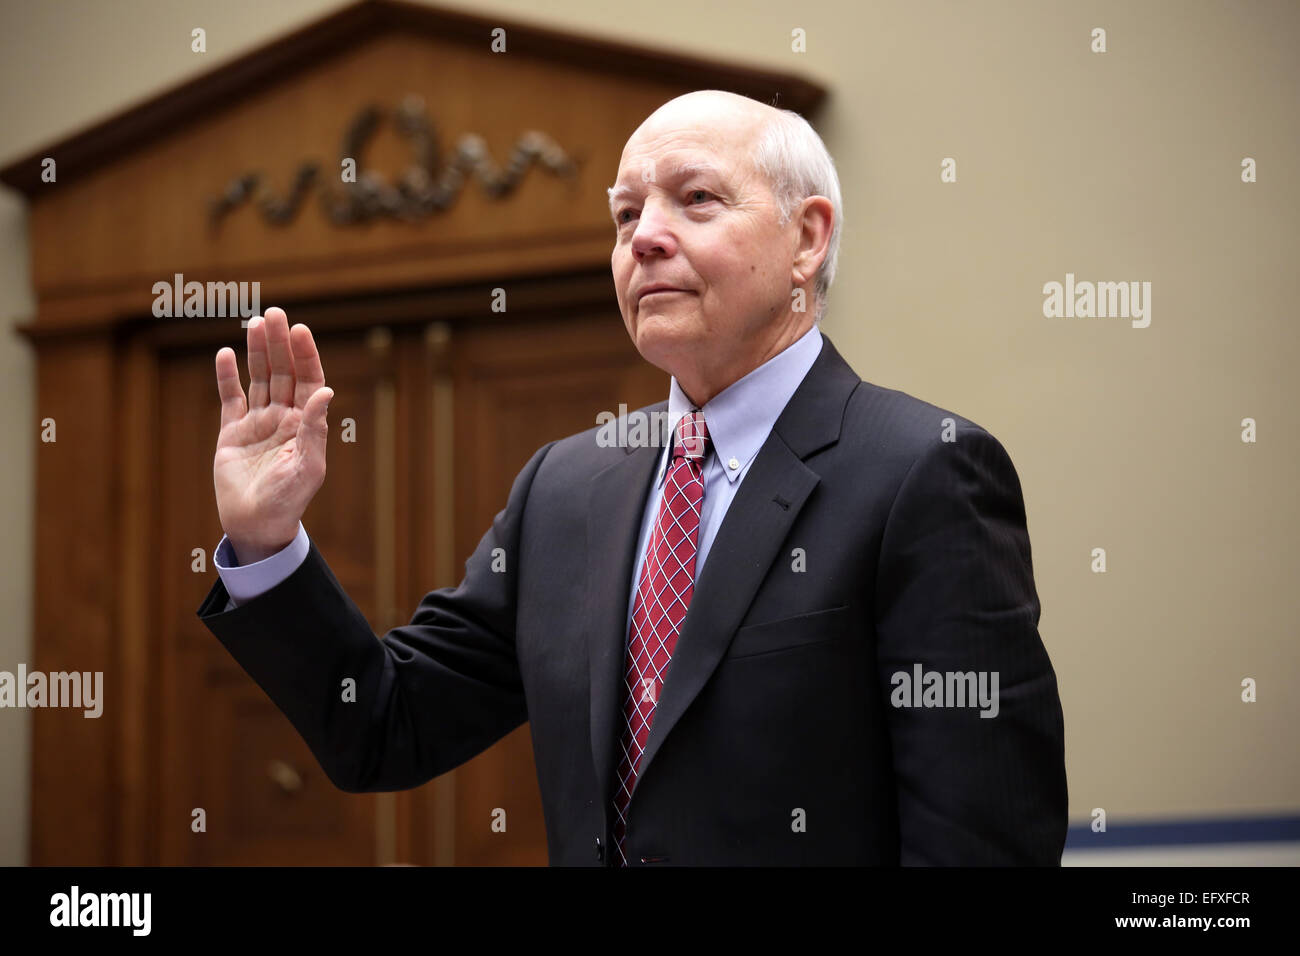 IRS Commissioner John Koskinen is sworn in to testify at the House Oversight and Government Reform Committee hearing on the IRS targeting of political groups on Capitol Hill March 26, 2014 in Washington, DC. Stock Photo